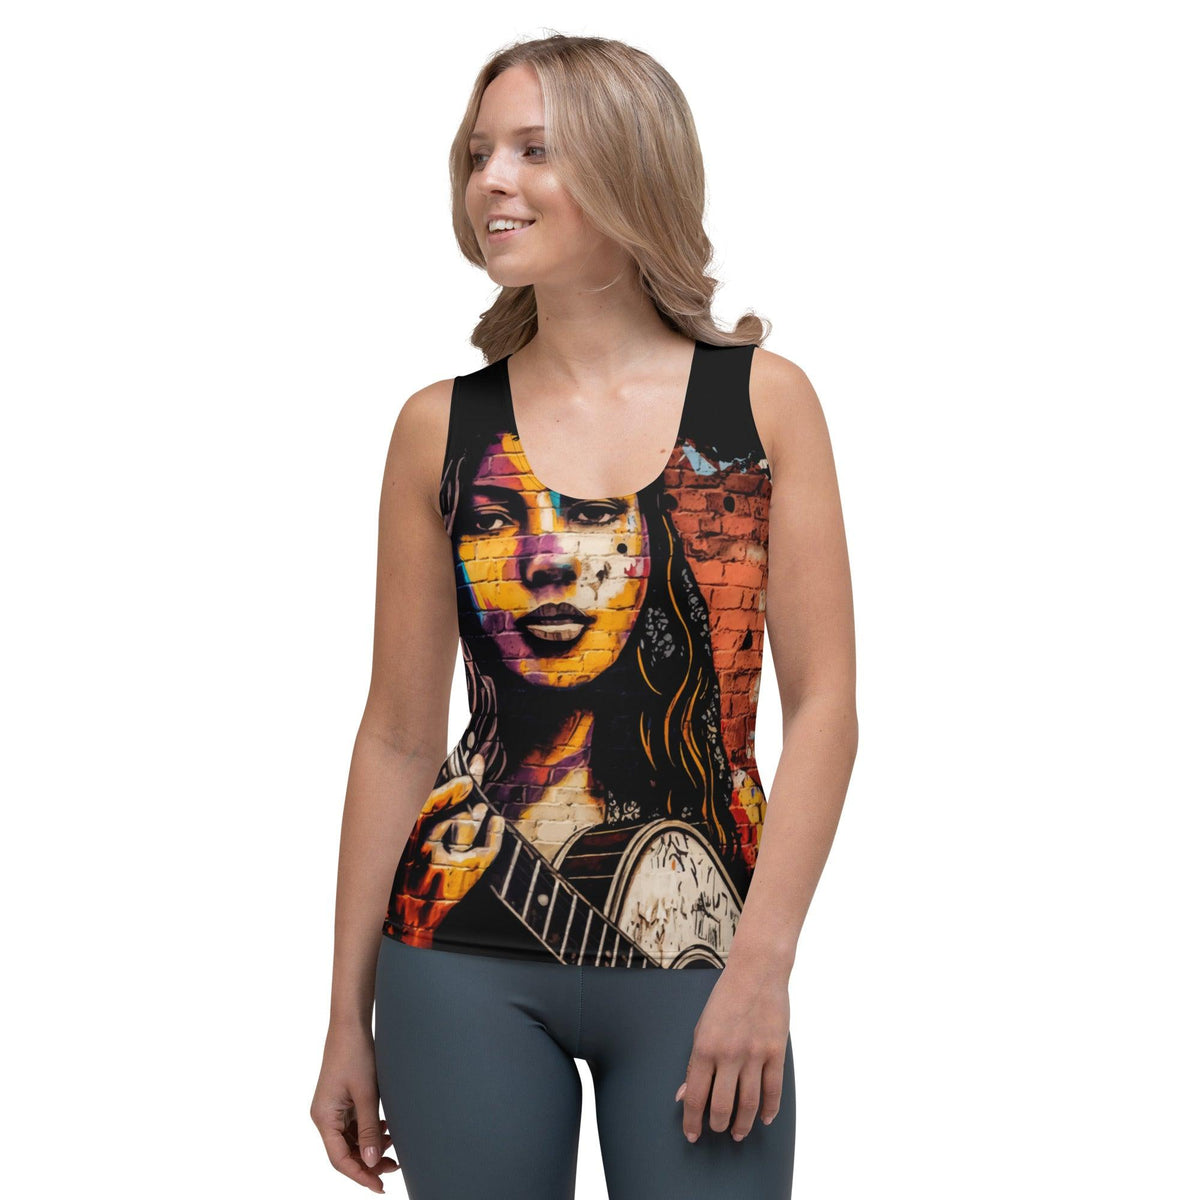 Guitar Inspires Her Art Sublimation Cut & Sew Tank Top - Beyond T-shirts